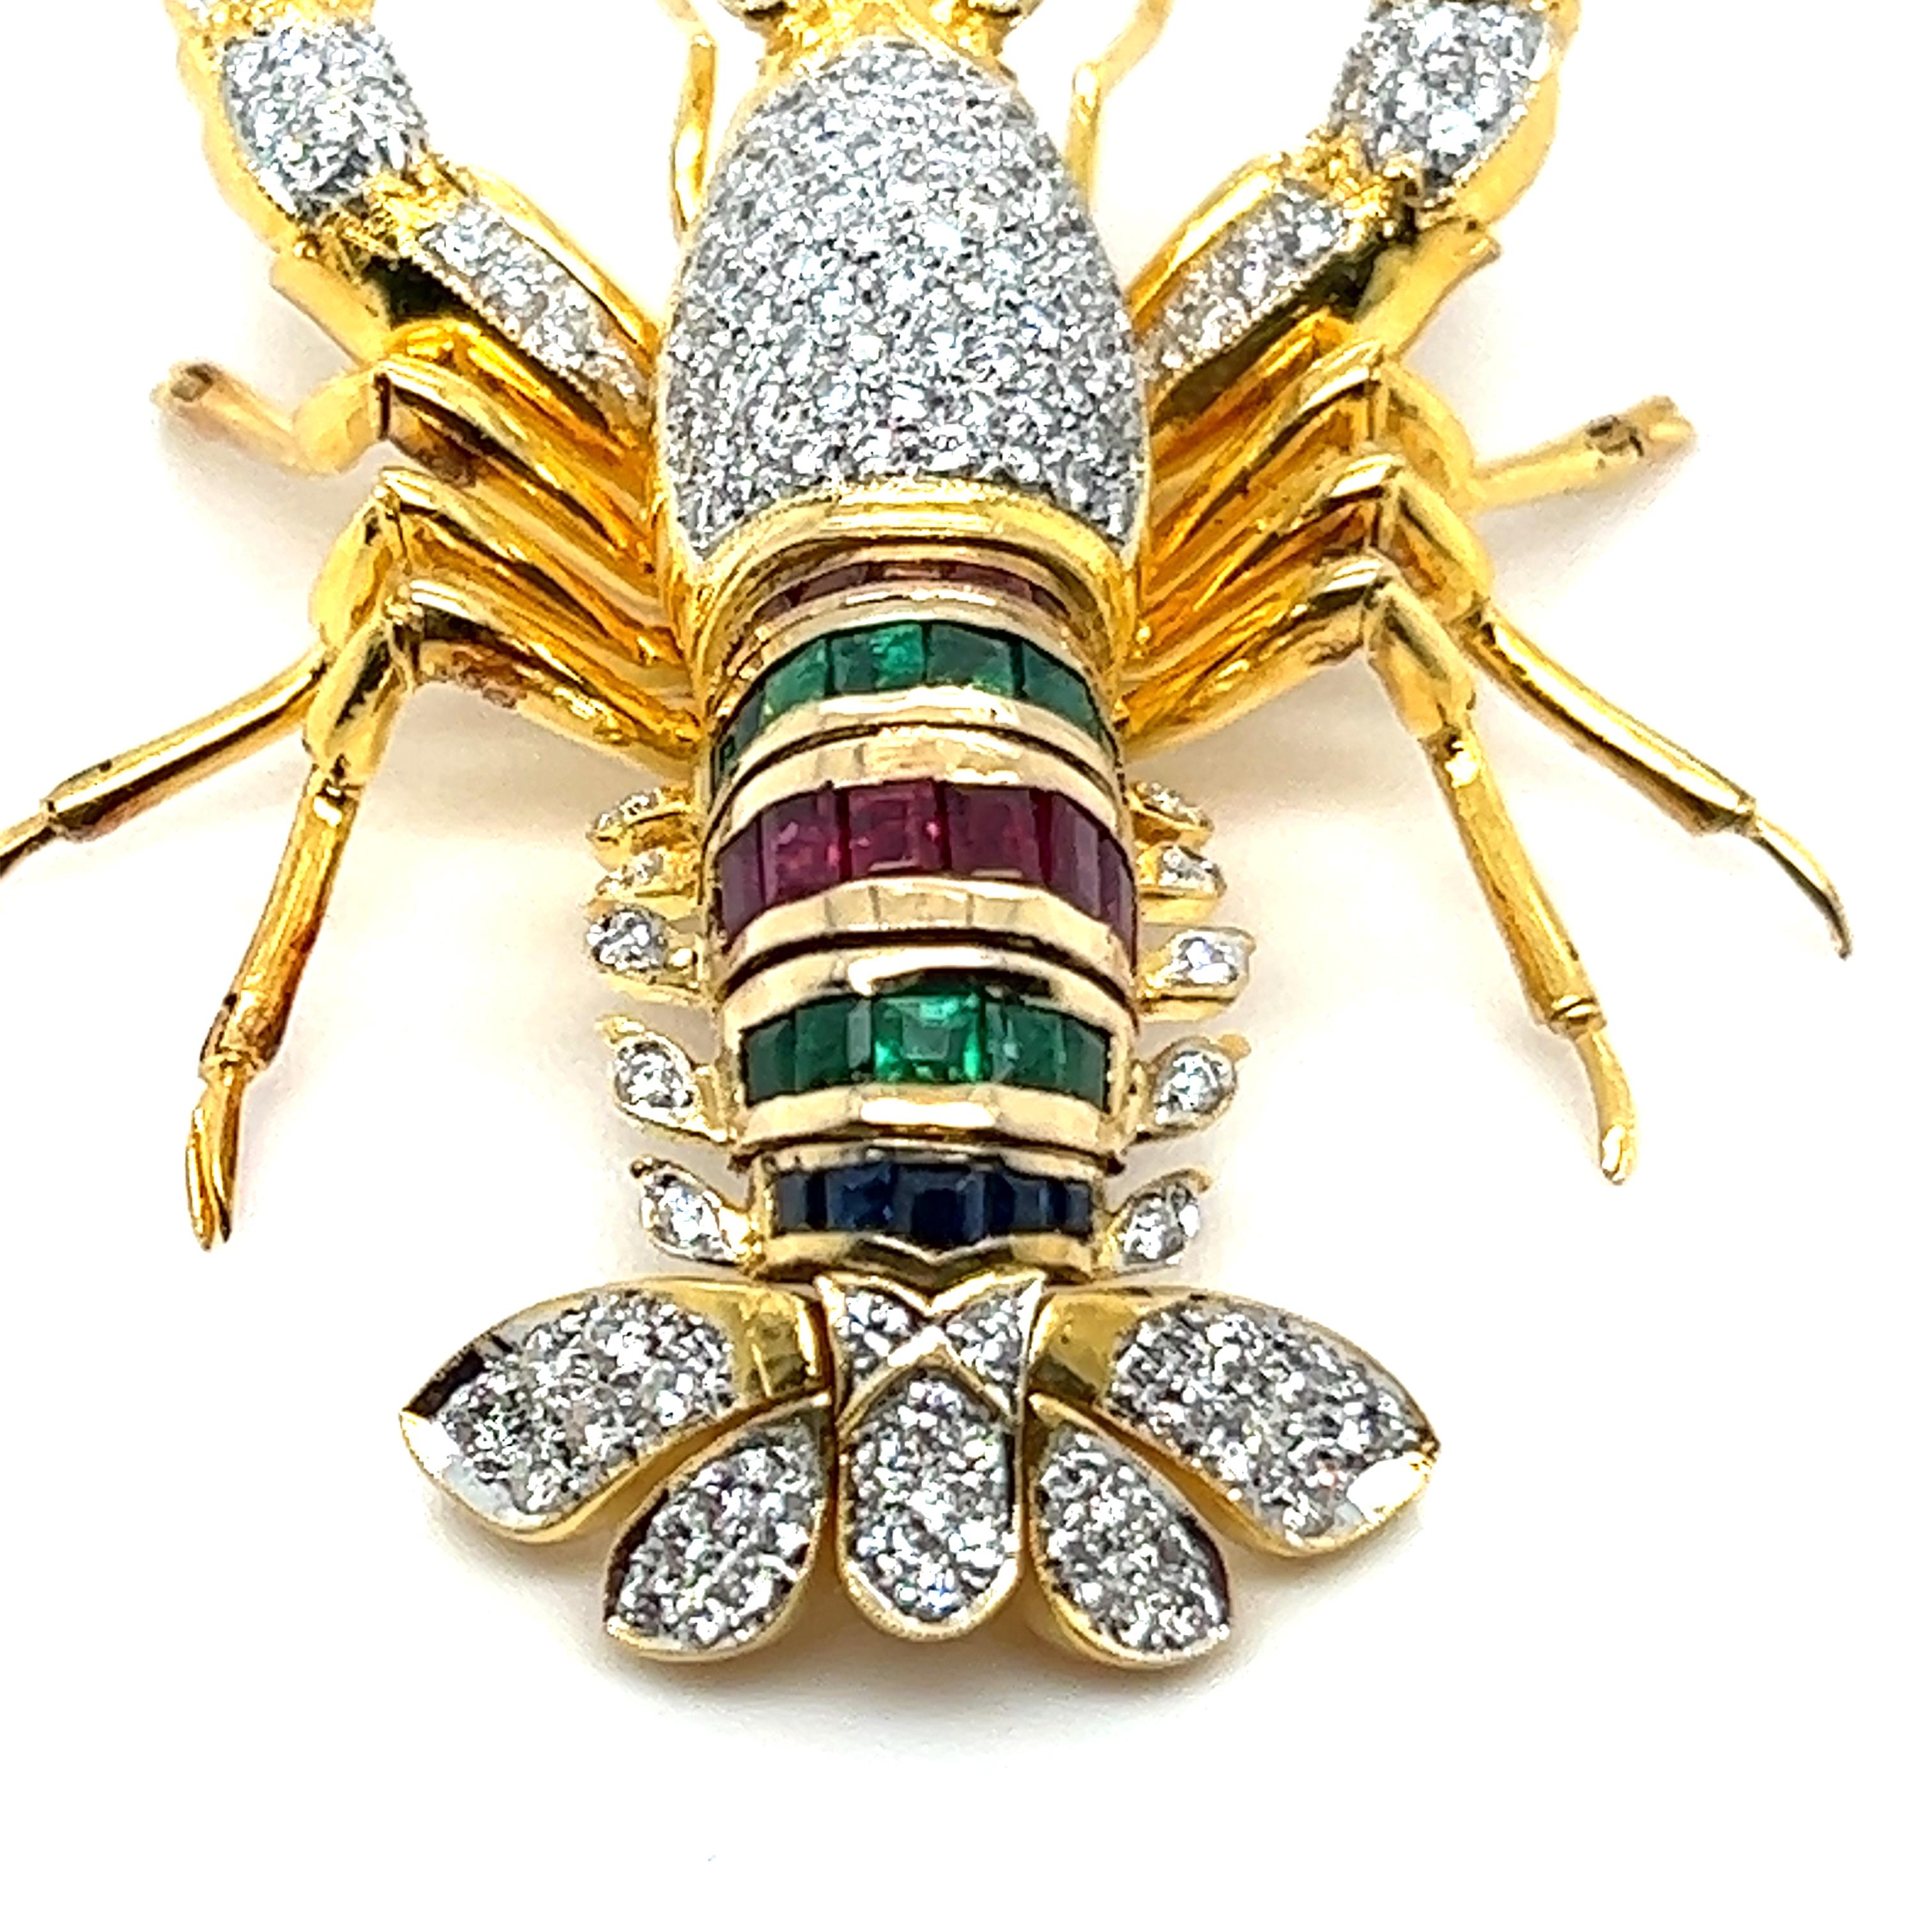 Lobster Brooch with Diamonds Rubies Emeralds & Sapphires in 18 Karat Yellow Gold 1